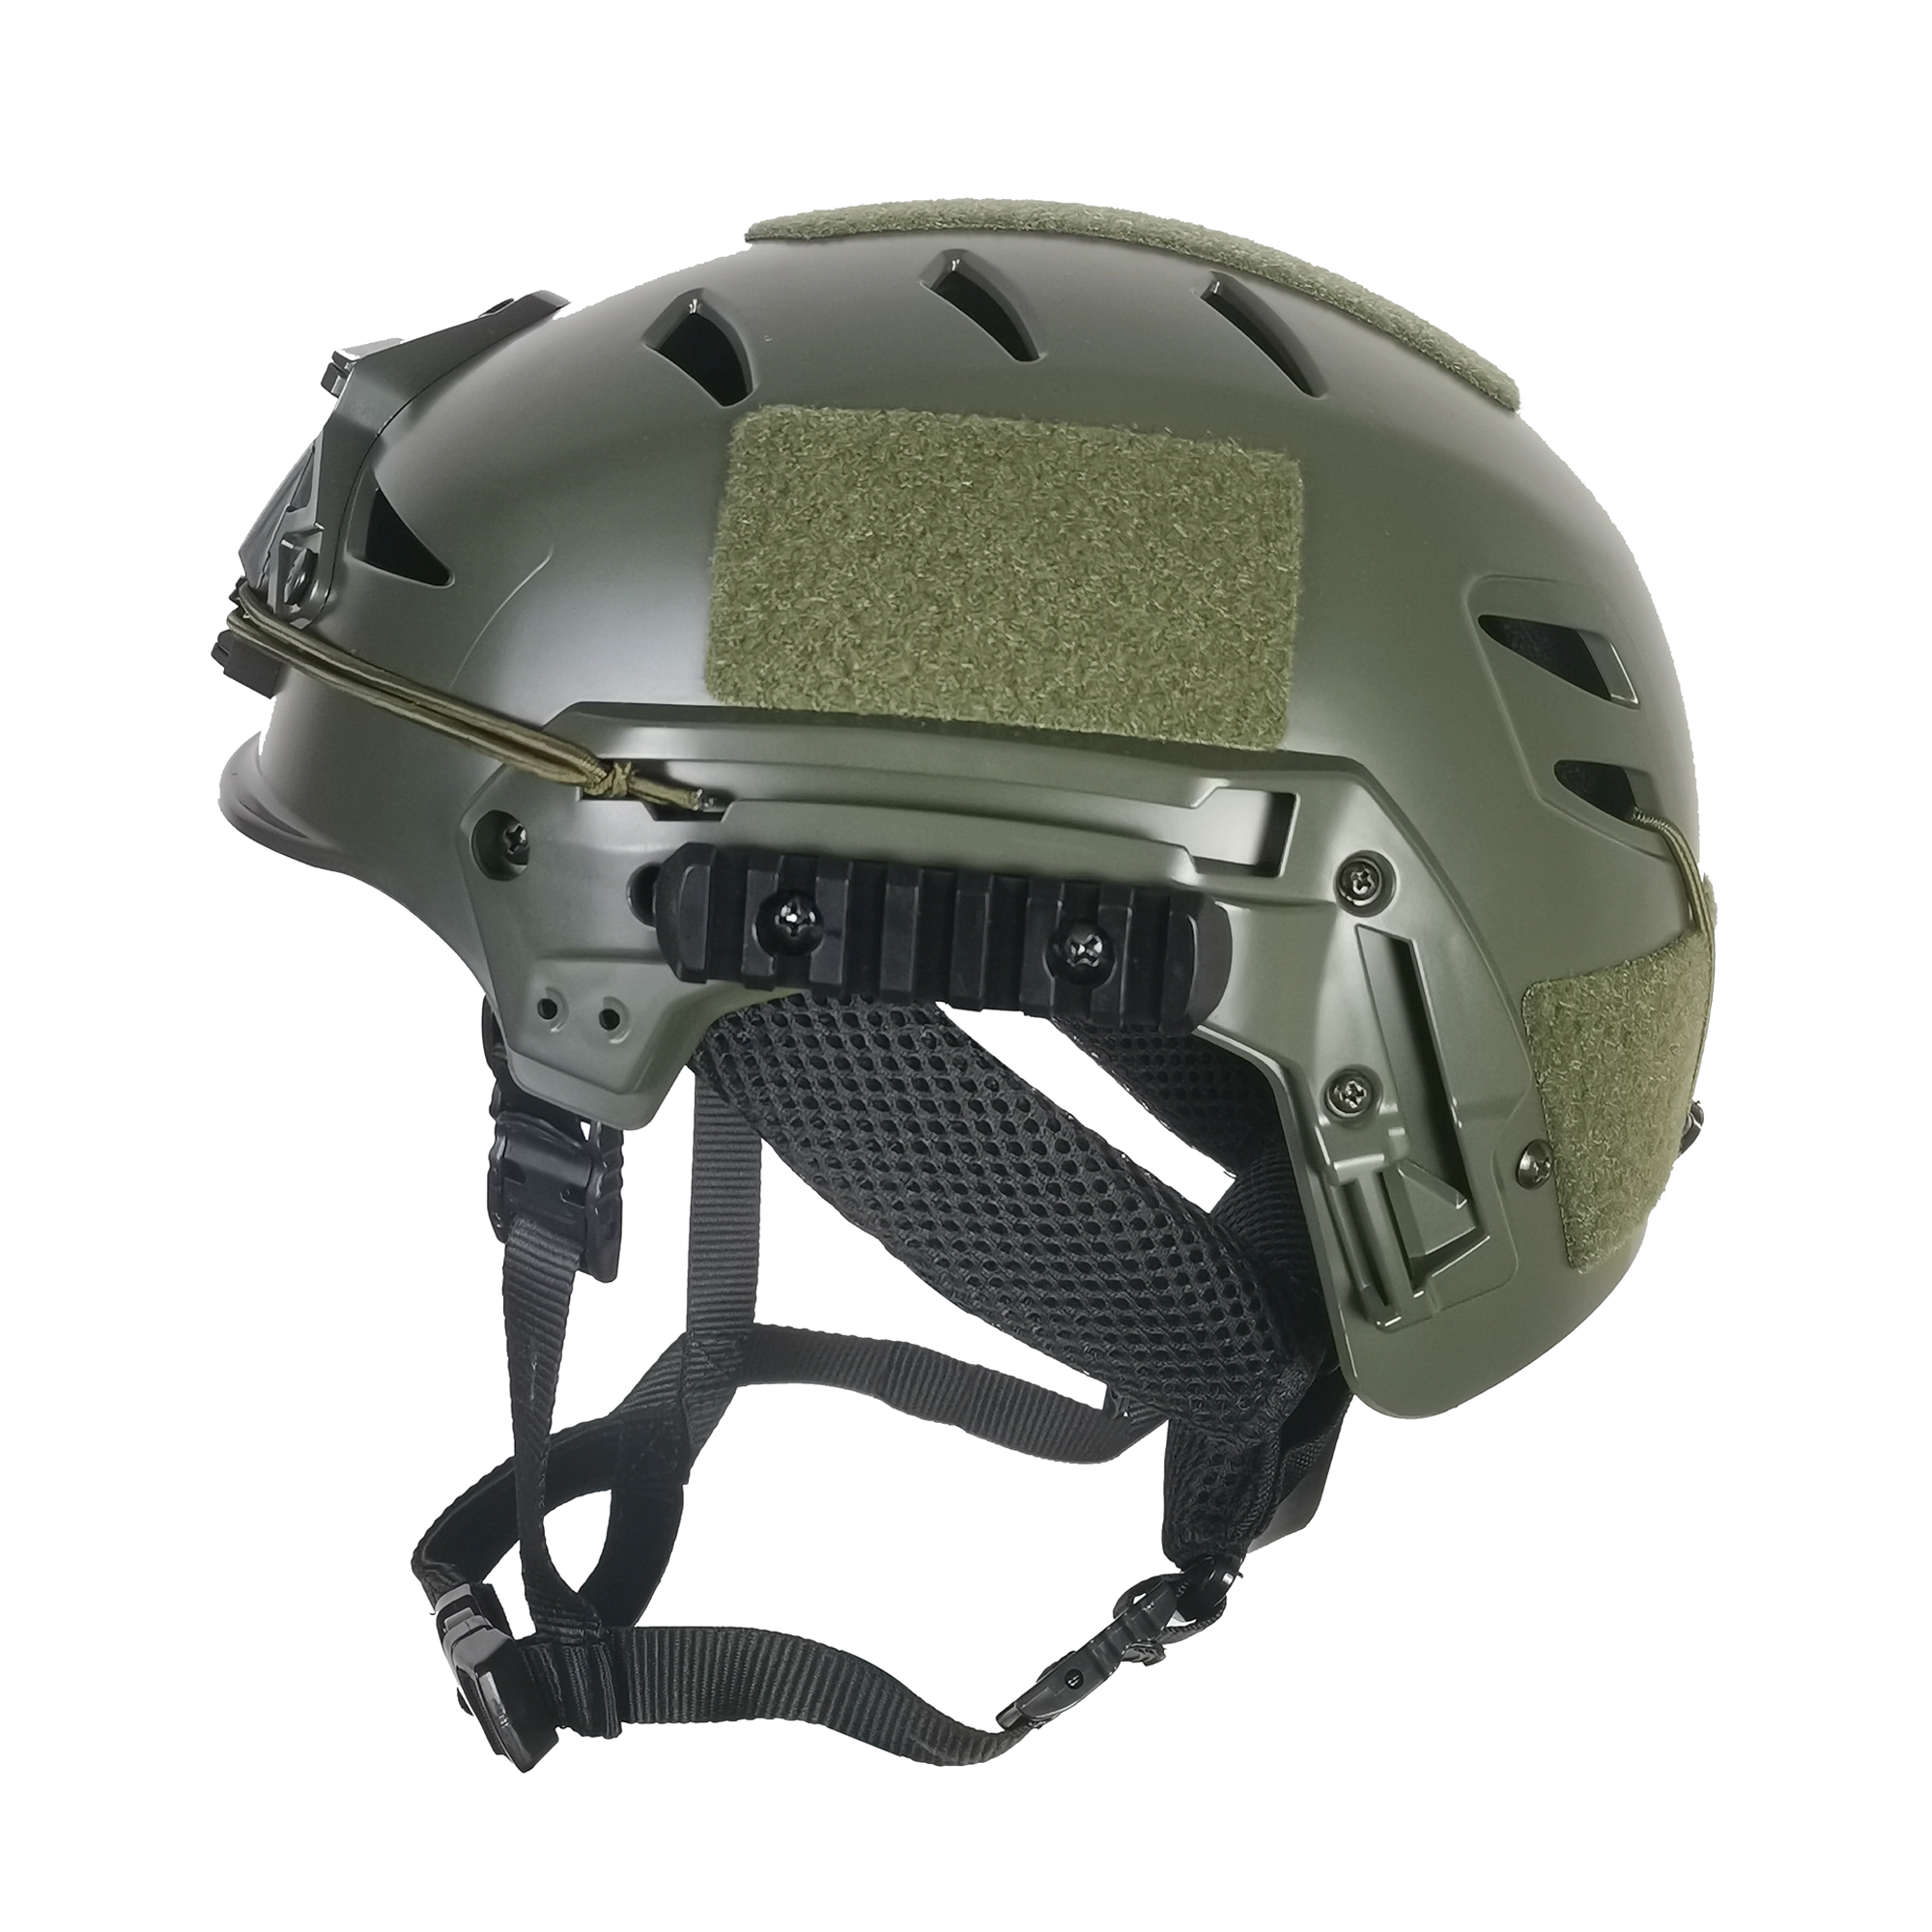 Round Hole Breathable wendy Type Outdoor Tactical ABS Helmet